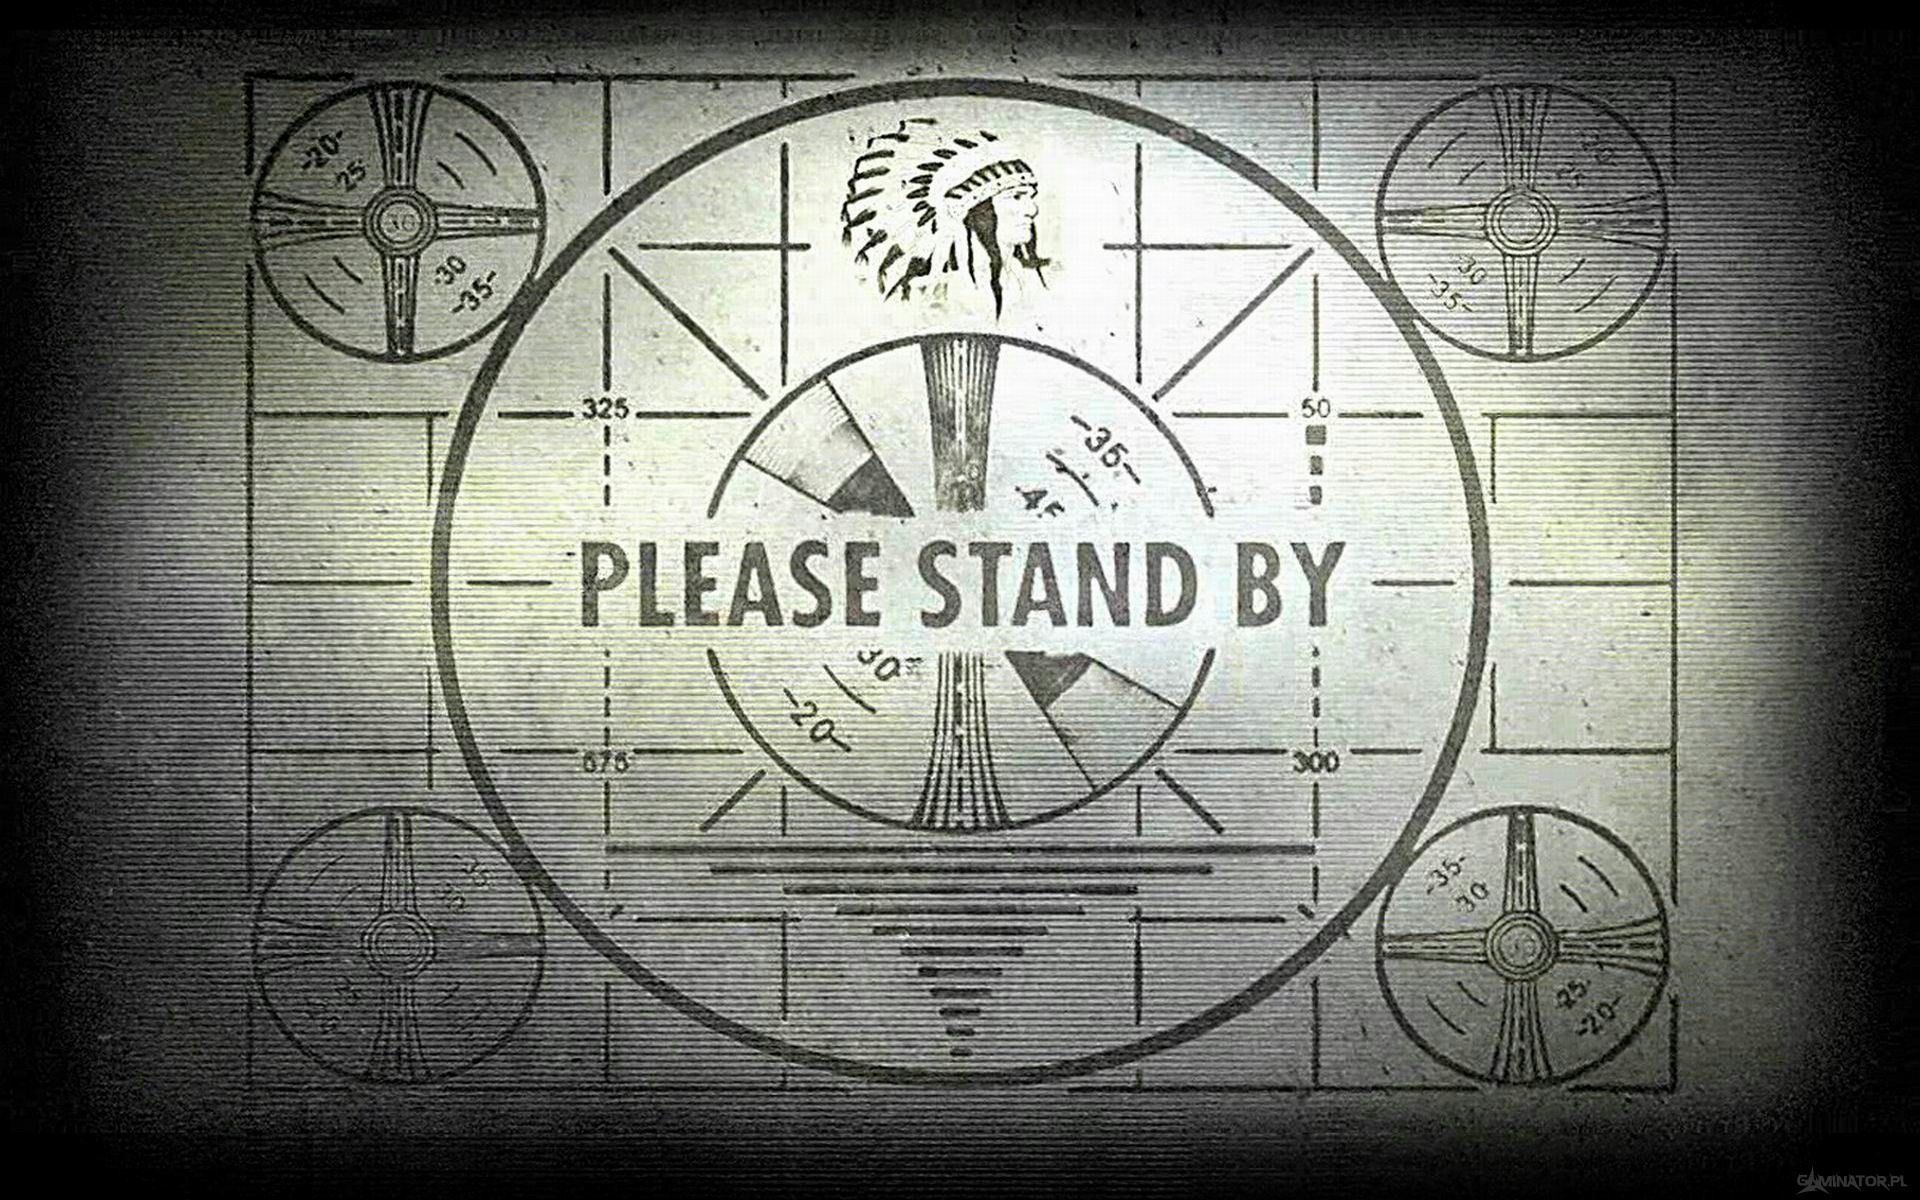 Fallout Wallpaper Backgrounds 14898 - HD Wallpapers Site